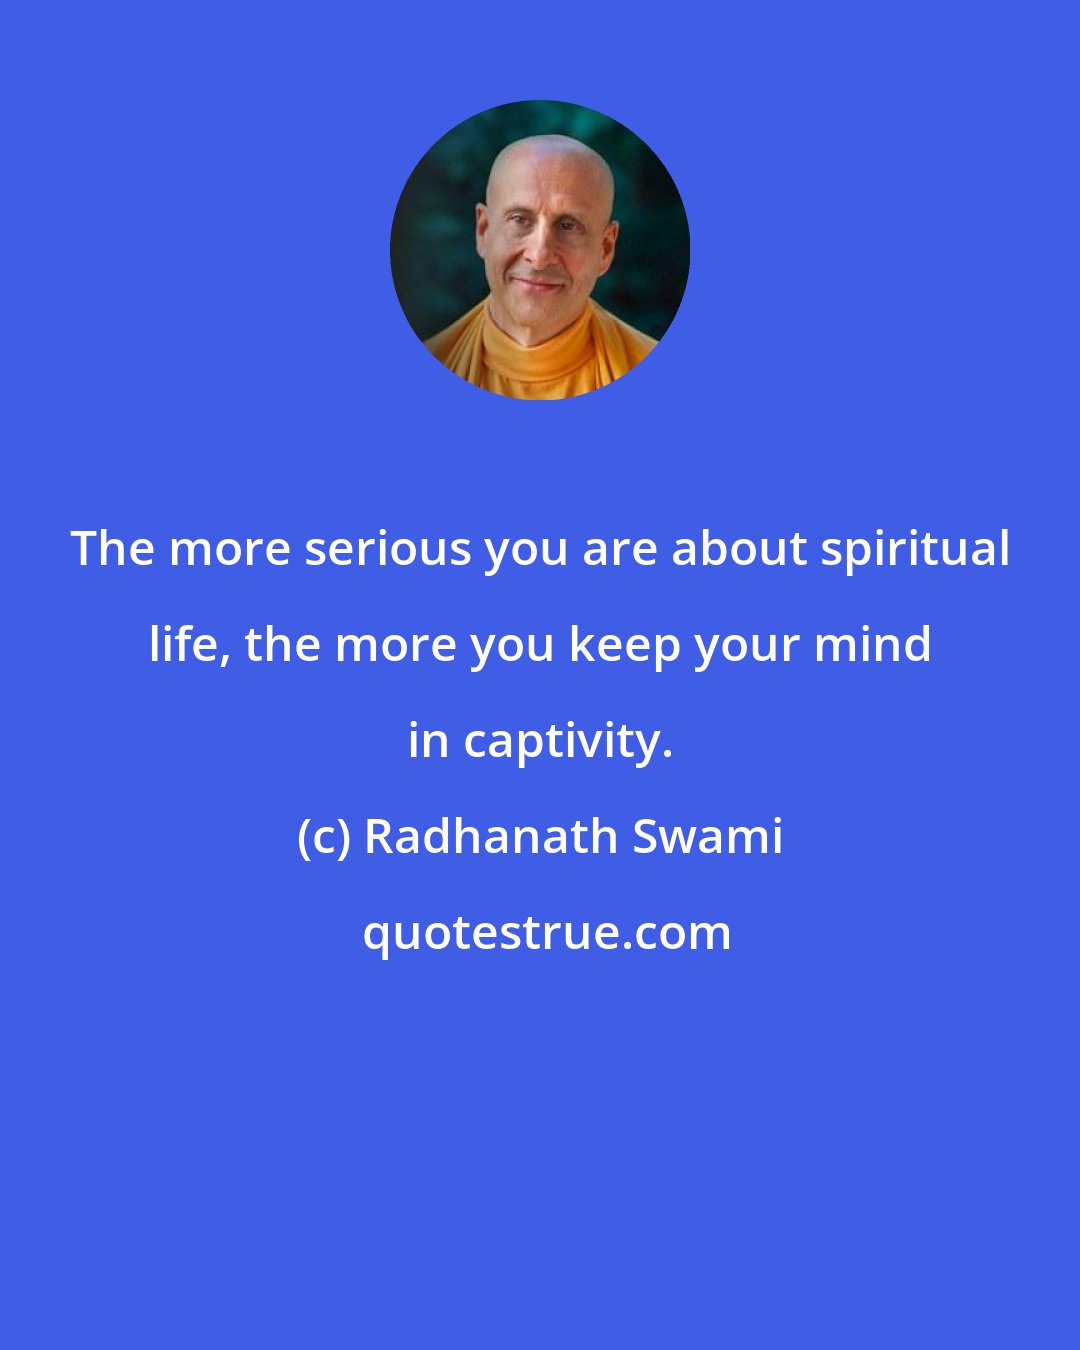 Radhanath Swami: The more serious you are about spiritual life, the more you keep your mind in captivity.